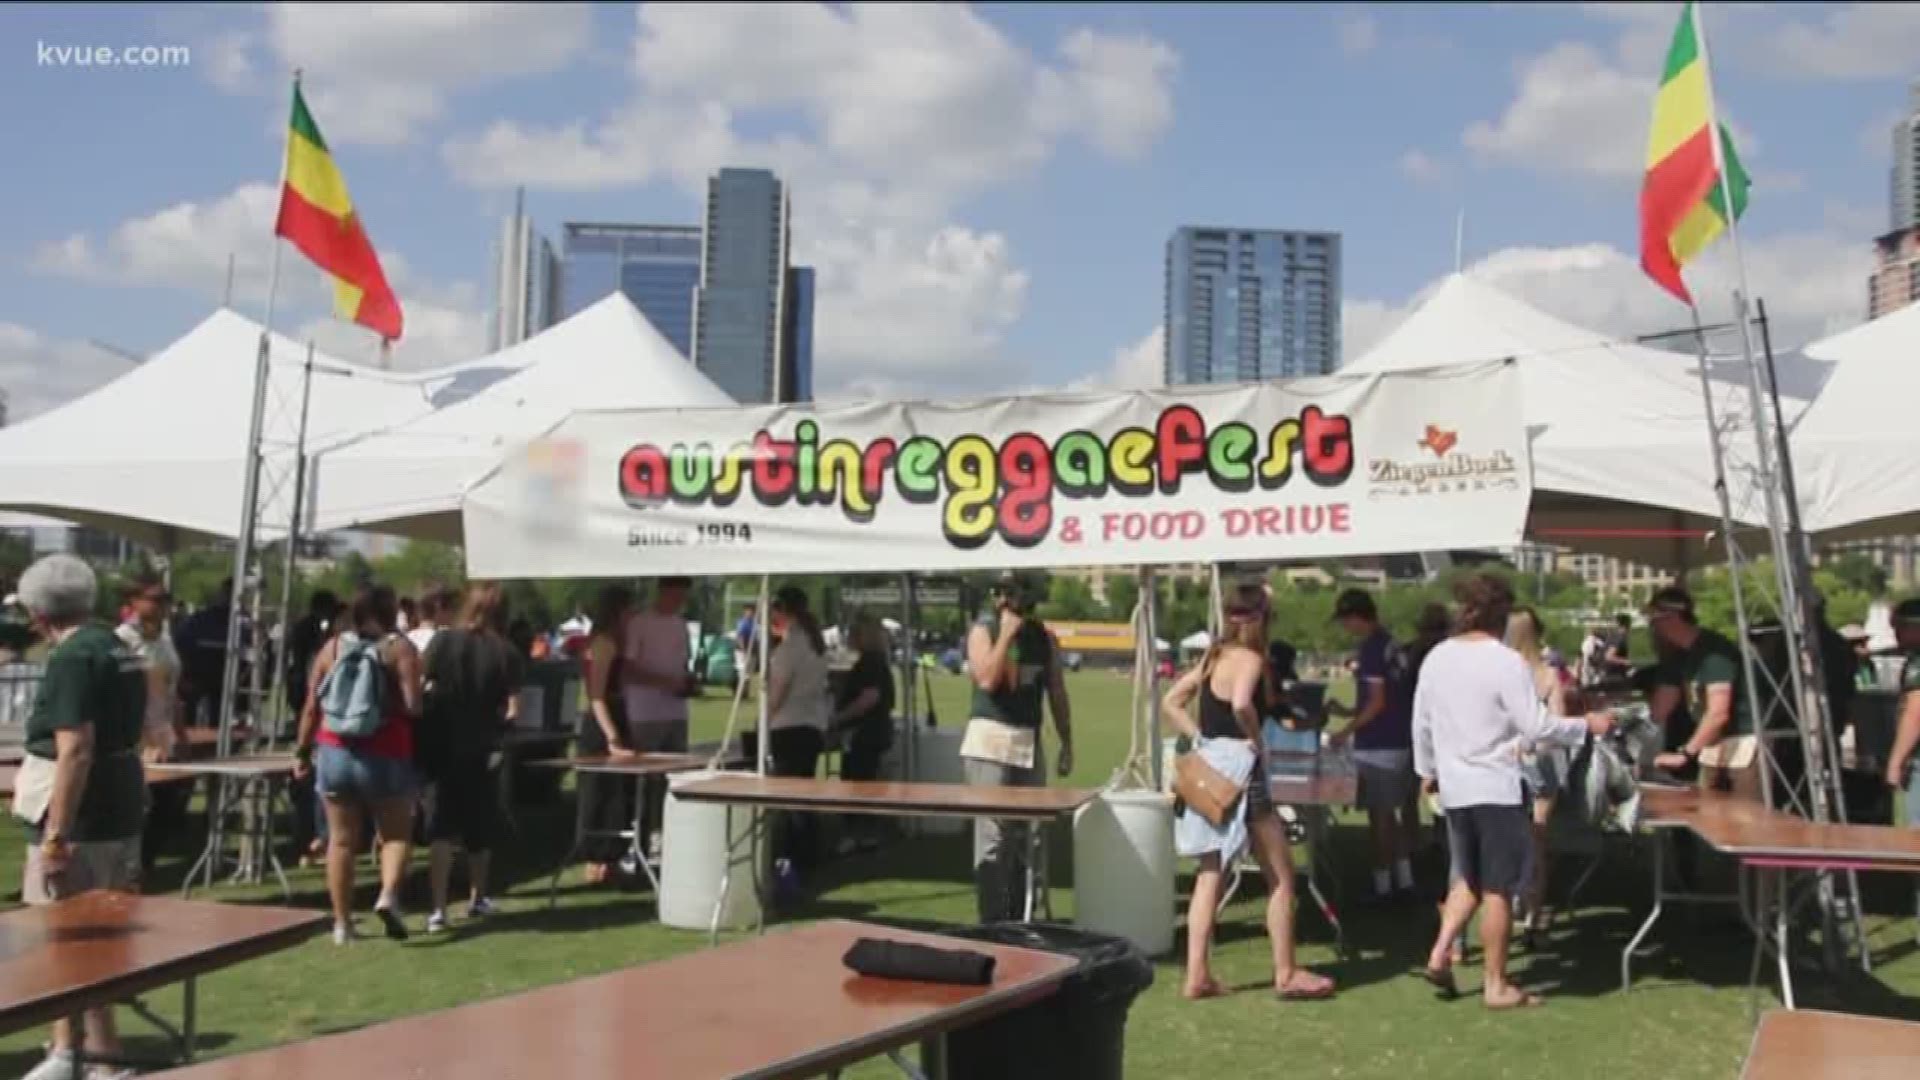 Over the last five years, the Austin Reggae Festival has provided more than one million meals to the Central Texas Food Bankl.